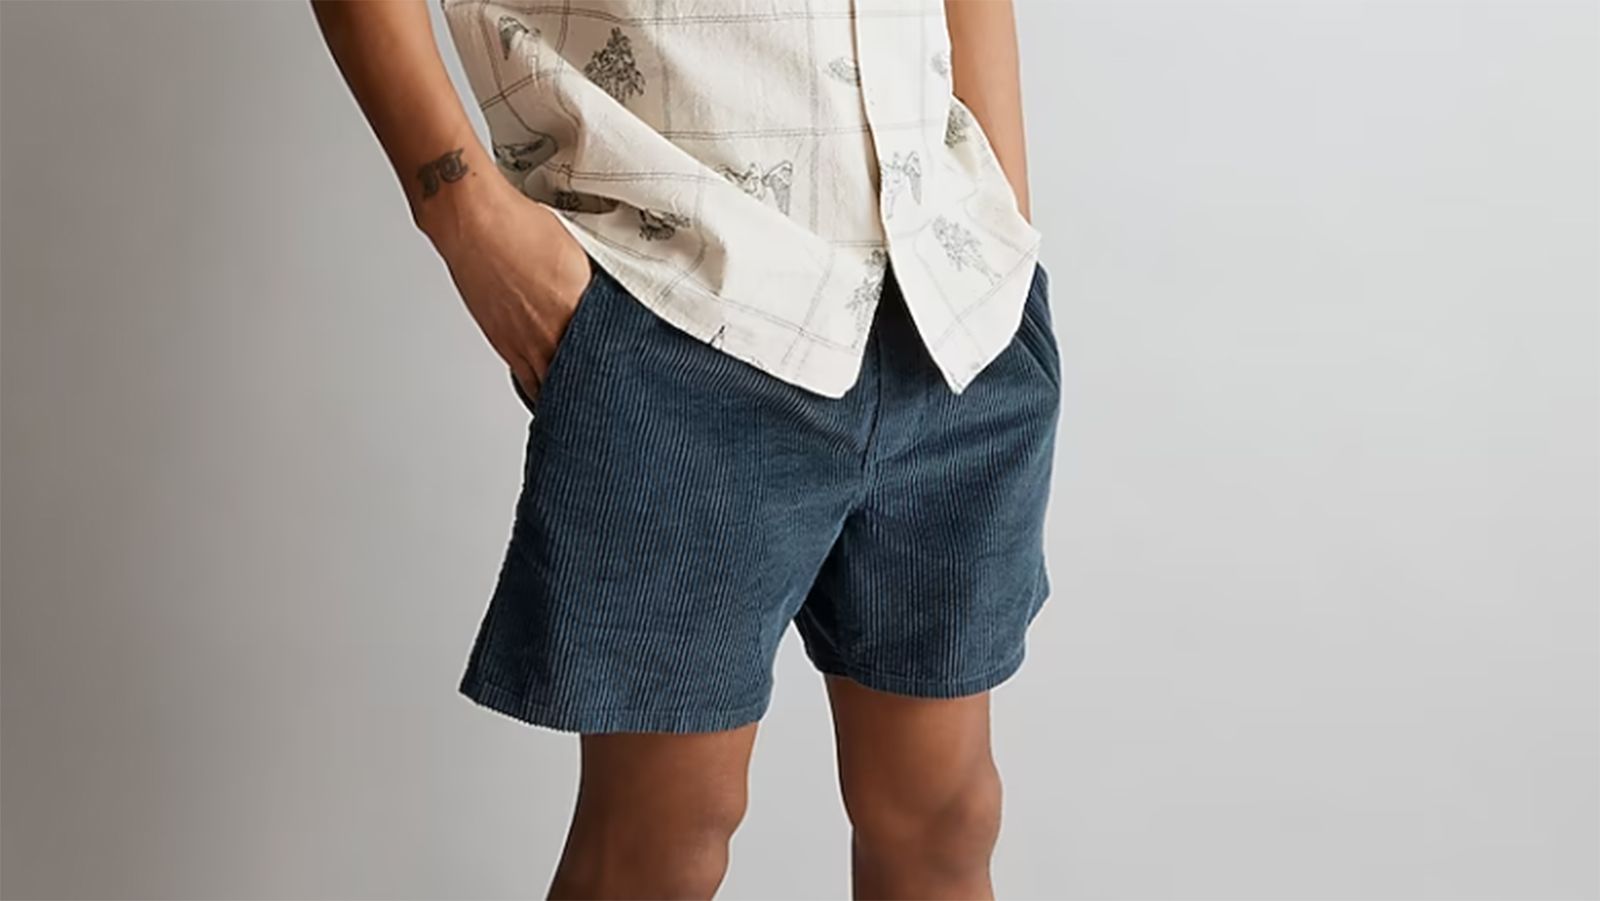 Best men's shorts 2023, there are many different styles of shorts that are suitable for men, and the best one for you will depend on your personal preferences and body type.